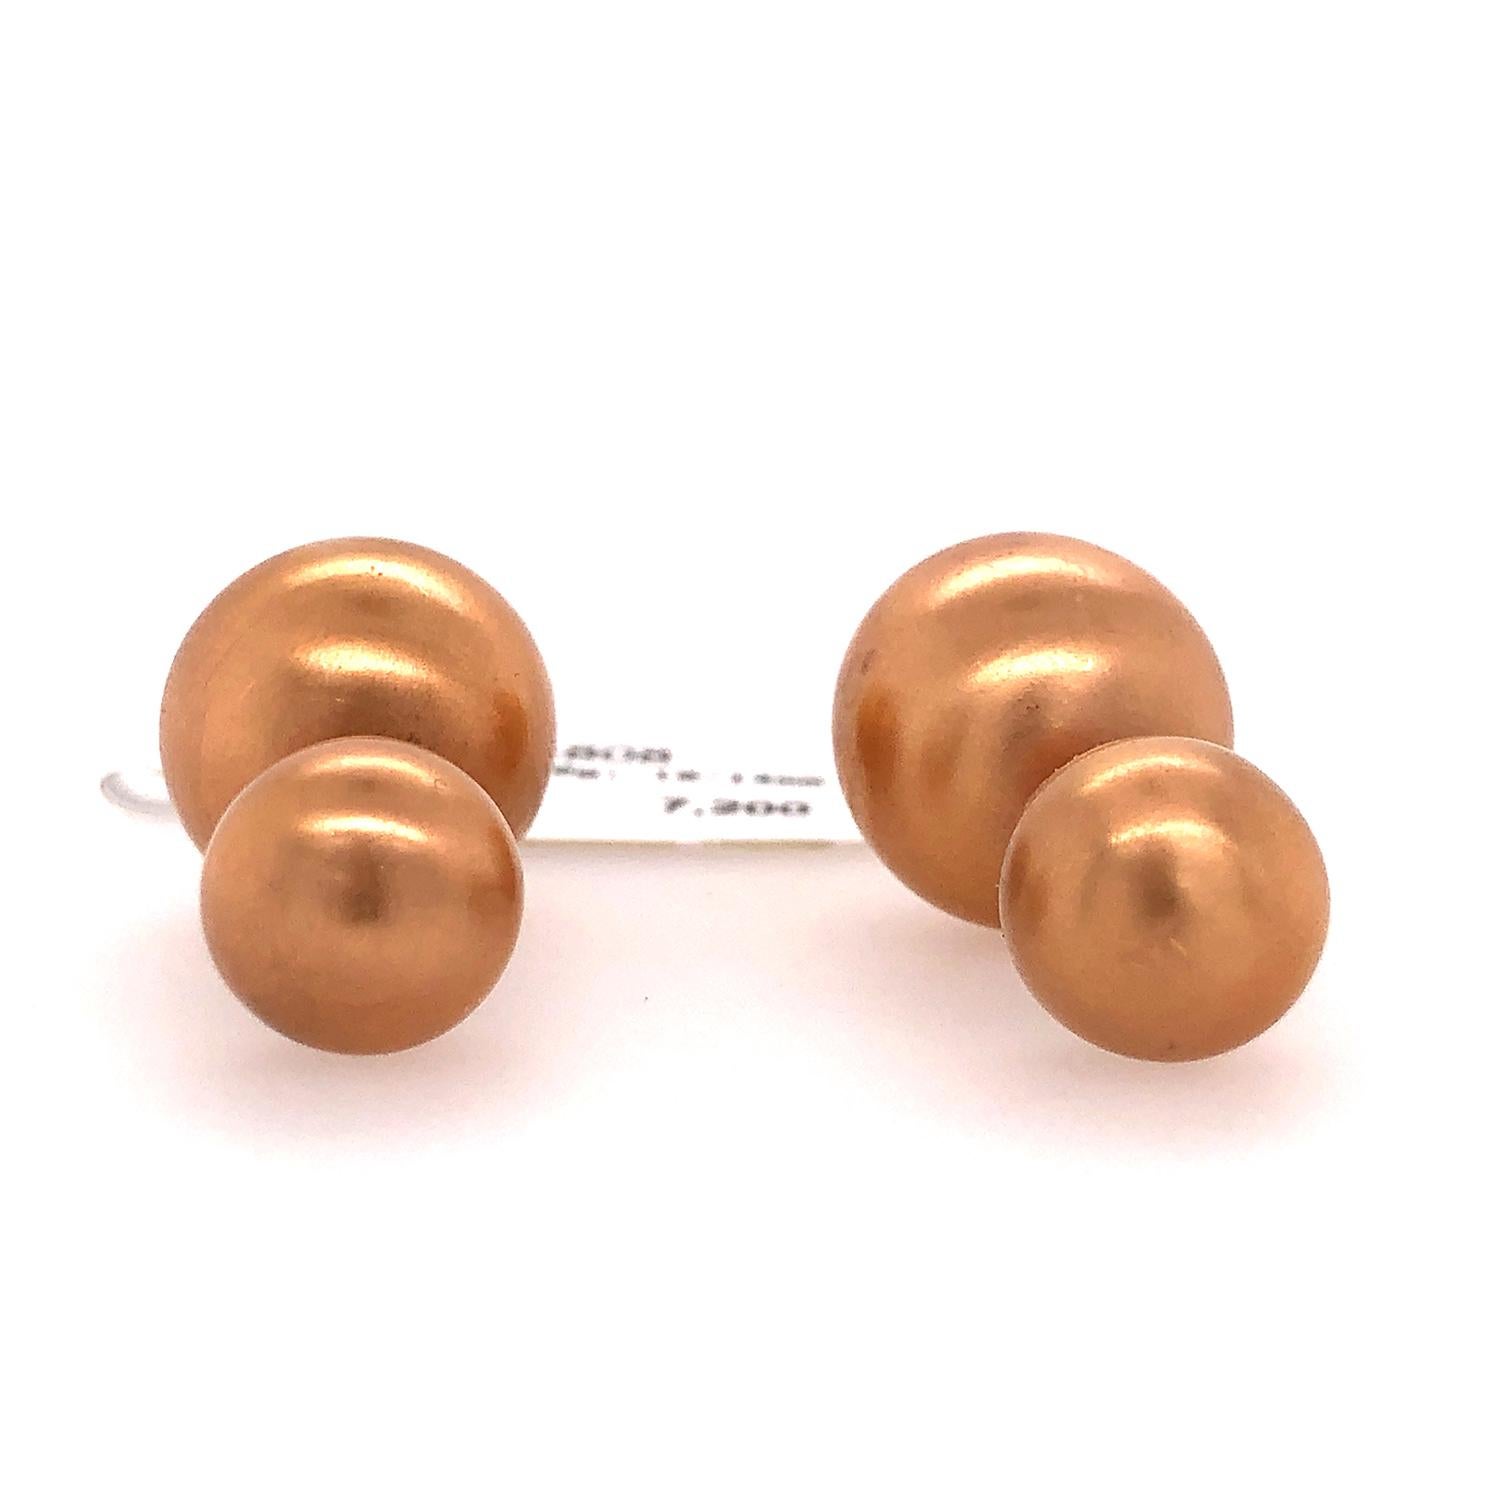 18kt:17.50g,
Size: 10-14 MM